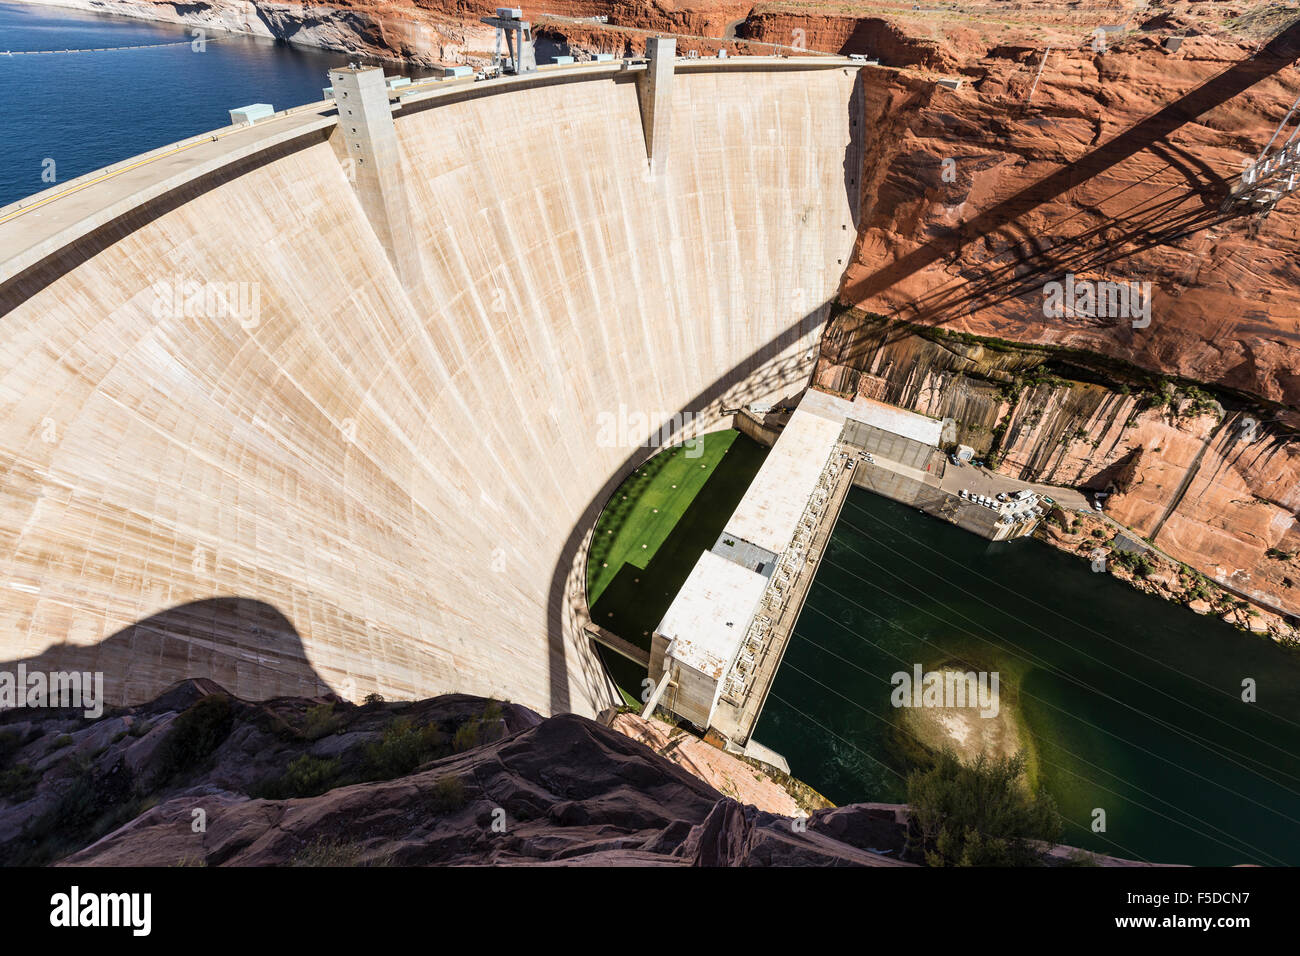 Glen Canyon Dam on the Colorado river in the southwestern United States. Stock Photo